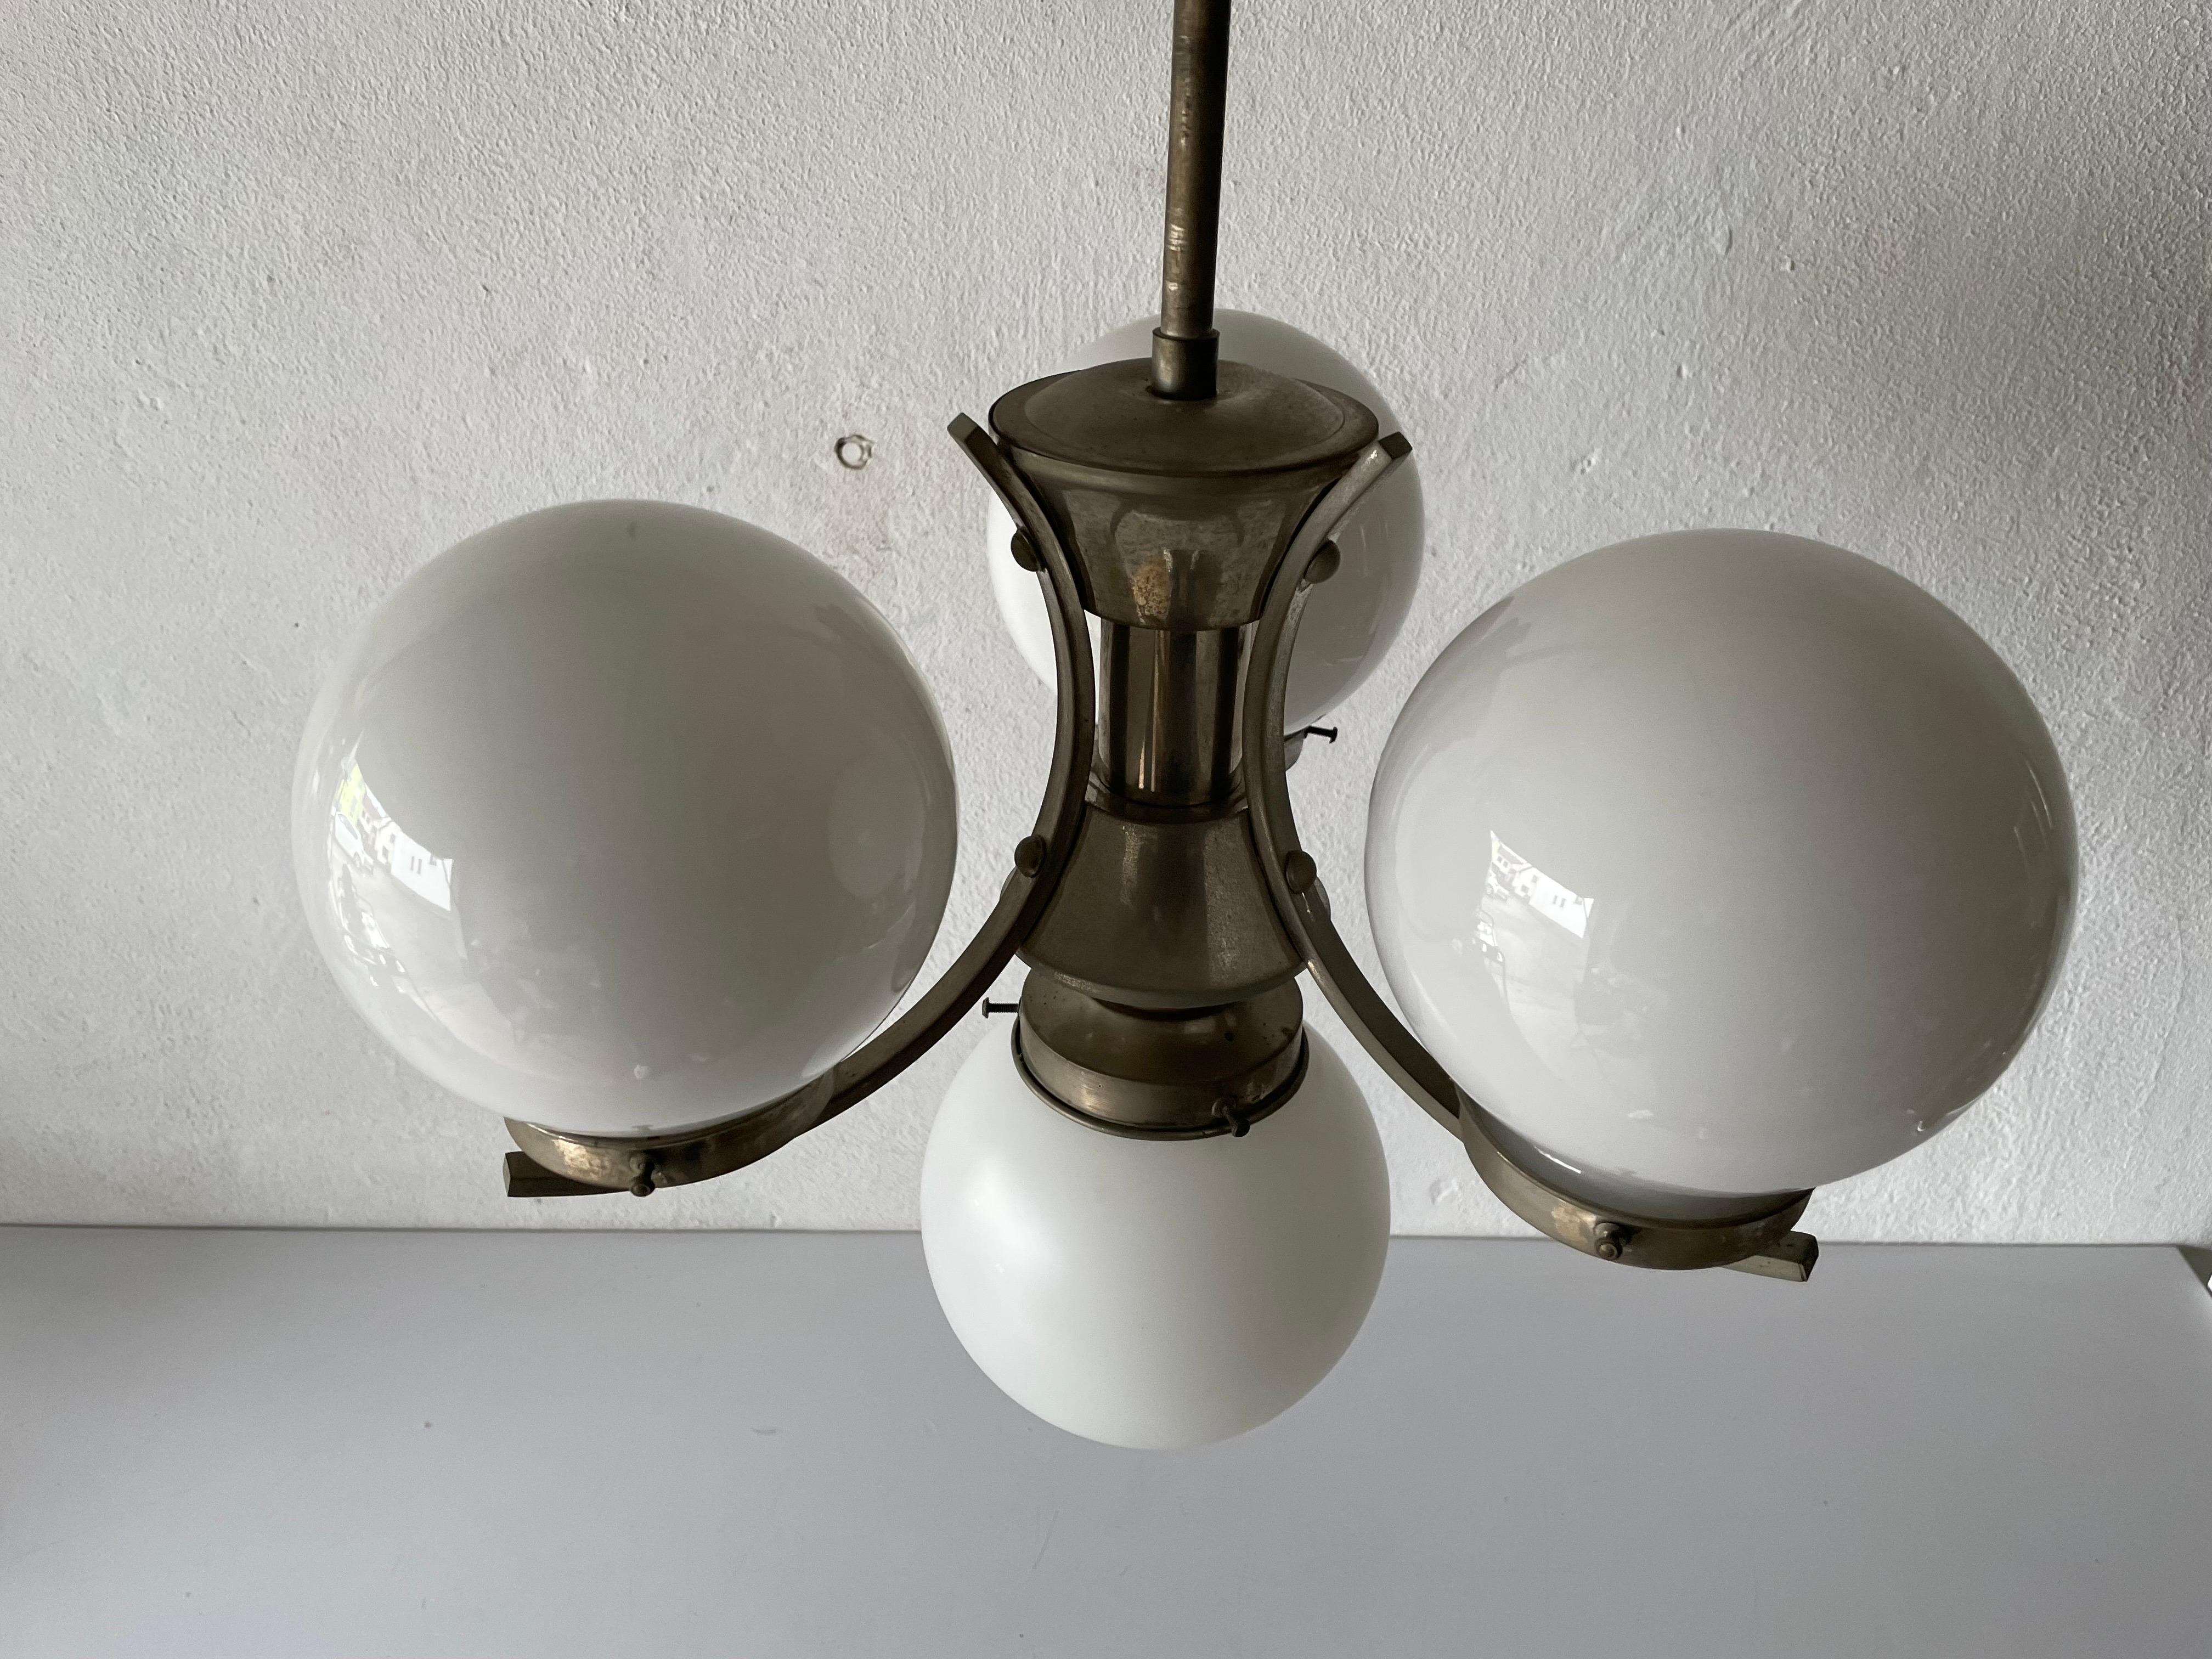 Art Deco Metallic Silver 4 Balls Ceiling Lamp, 1940s, Germany For Sale 2